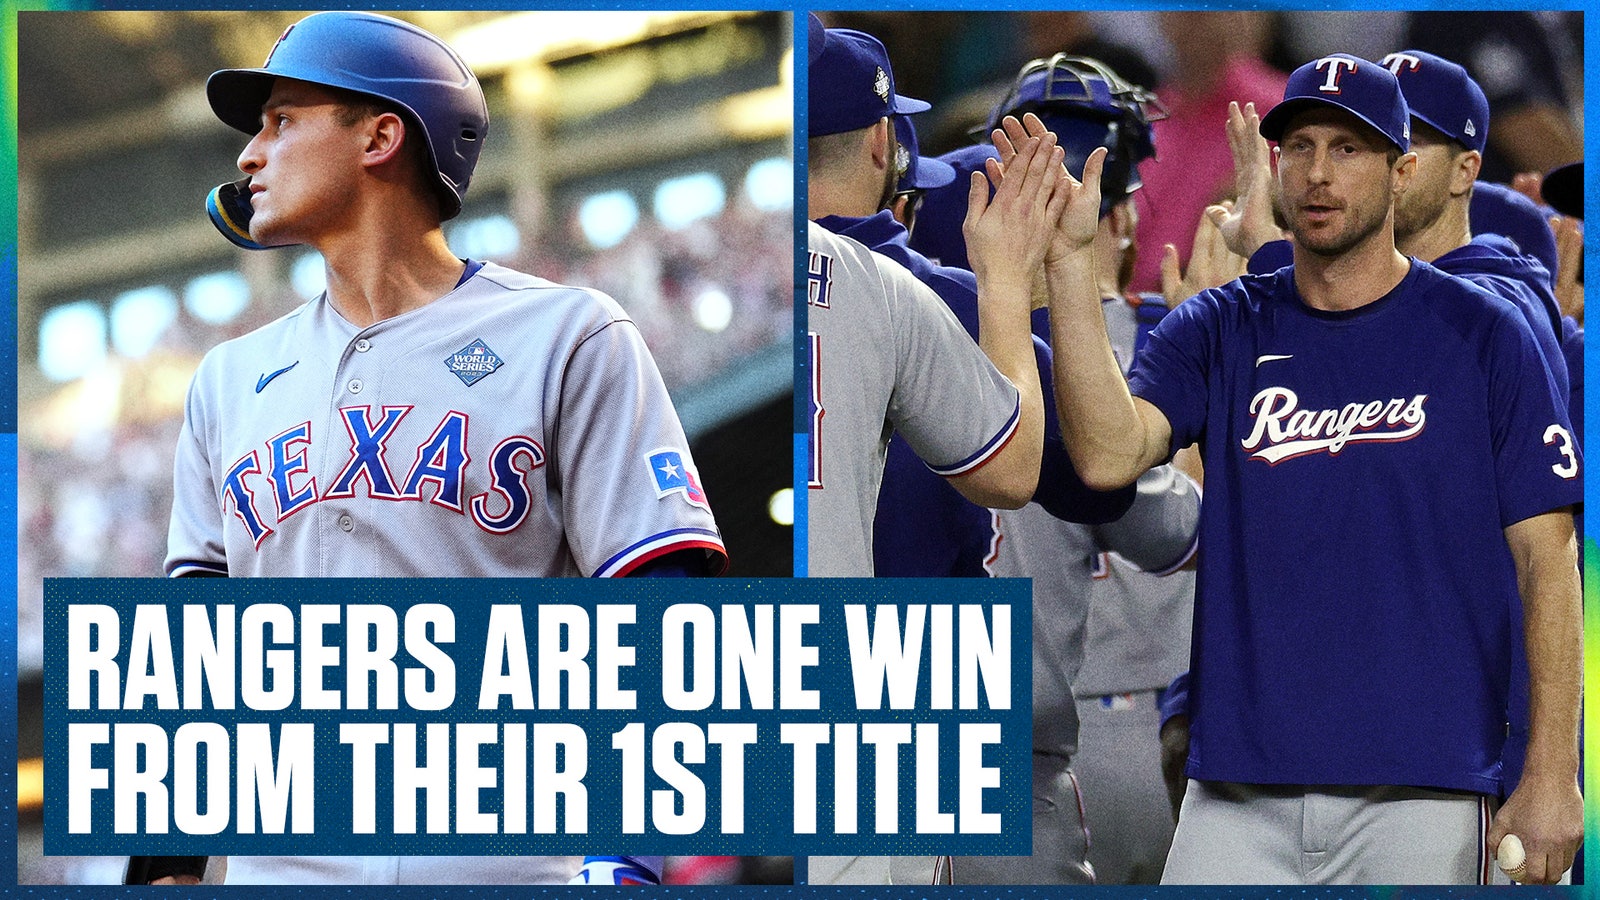 No García, no problem: Texas Rangers are 1 win away from their 1st World Series title